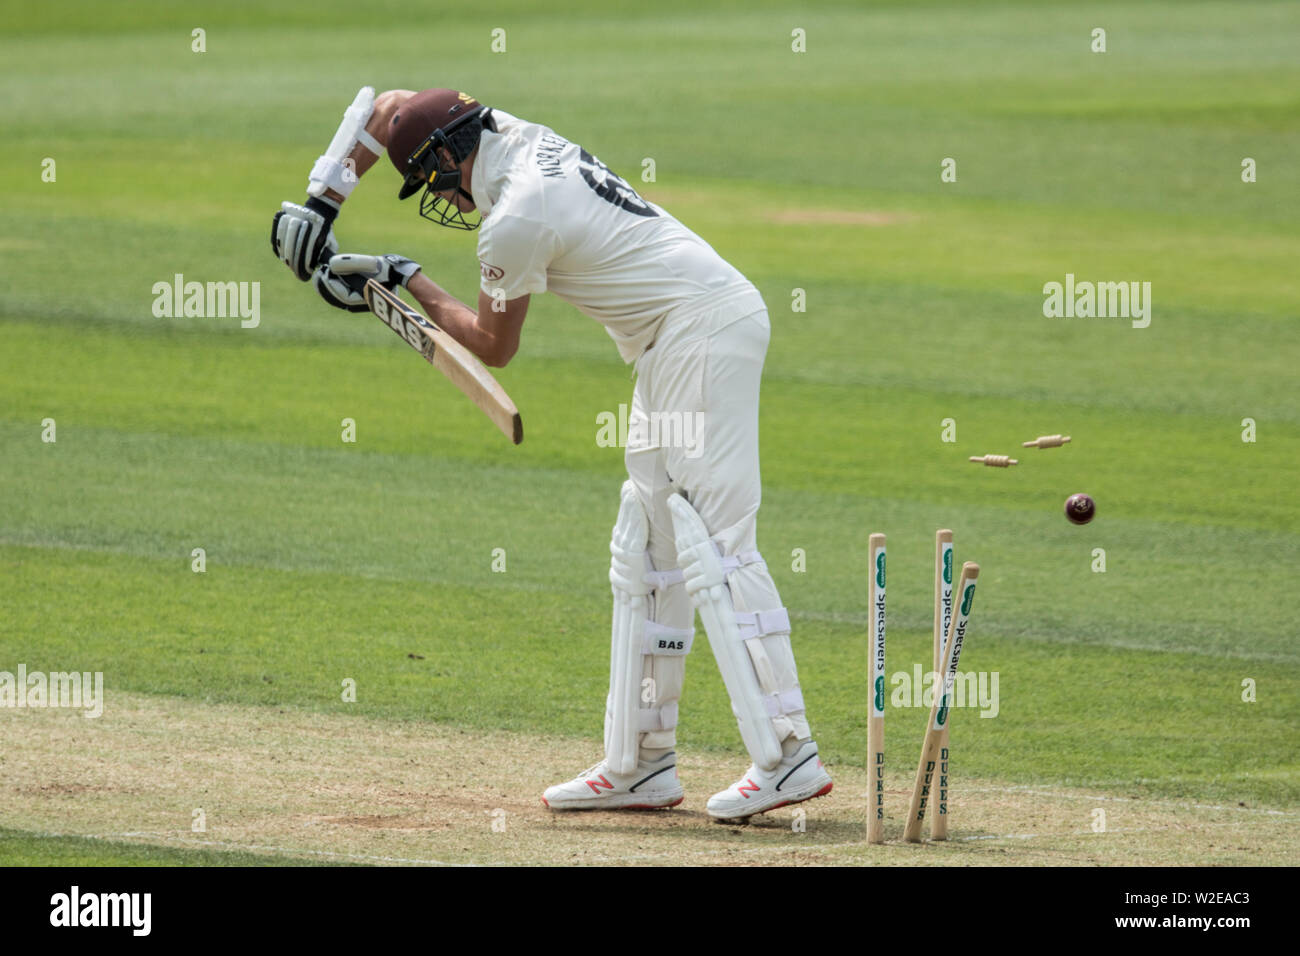 London, UK. 8 July, 2019.Matthew Milnes gets the wicket of Morne Morkel bowling for Surrey against Kent on day two of the Specsavers County Championship game at the Oval. David Rowe/Alamy Live New Stock Photo